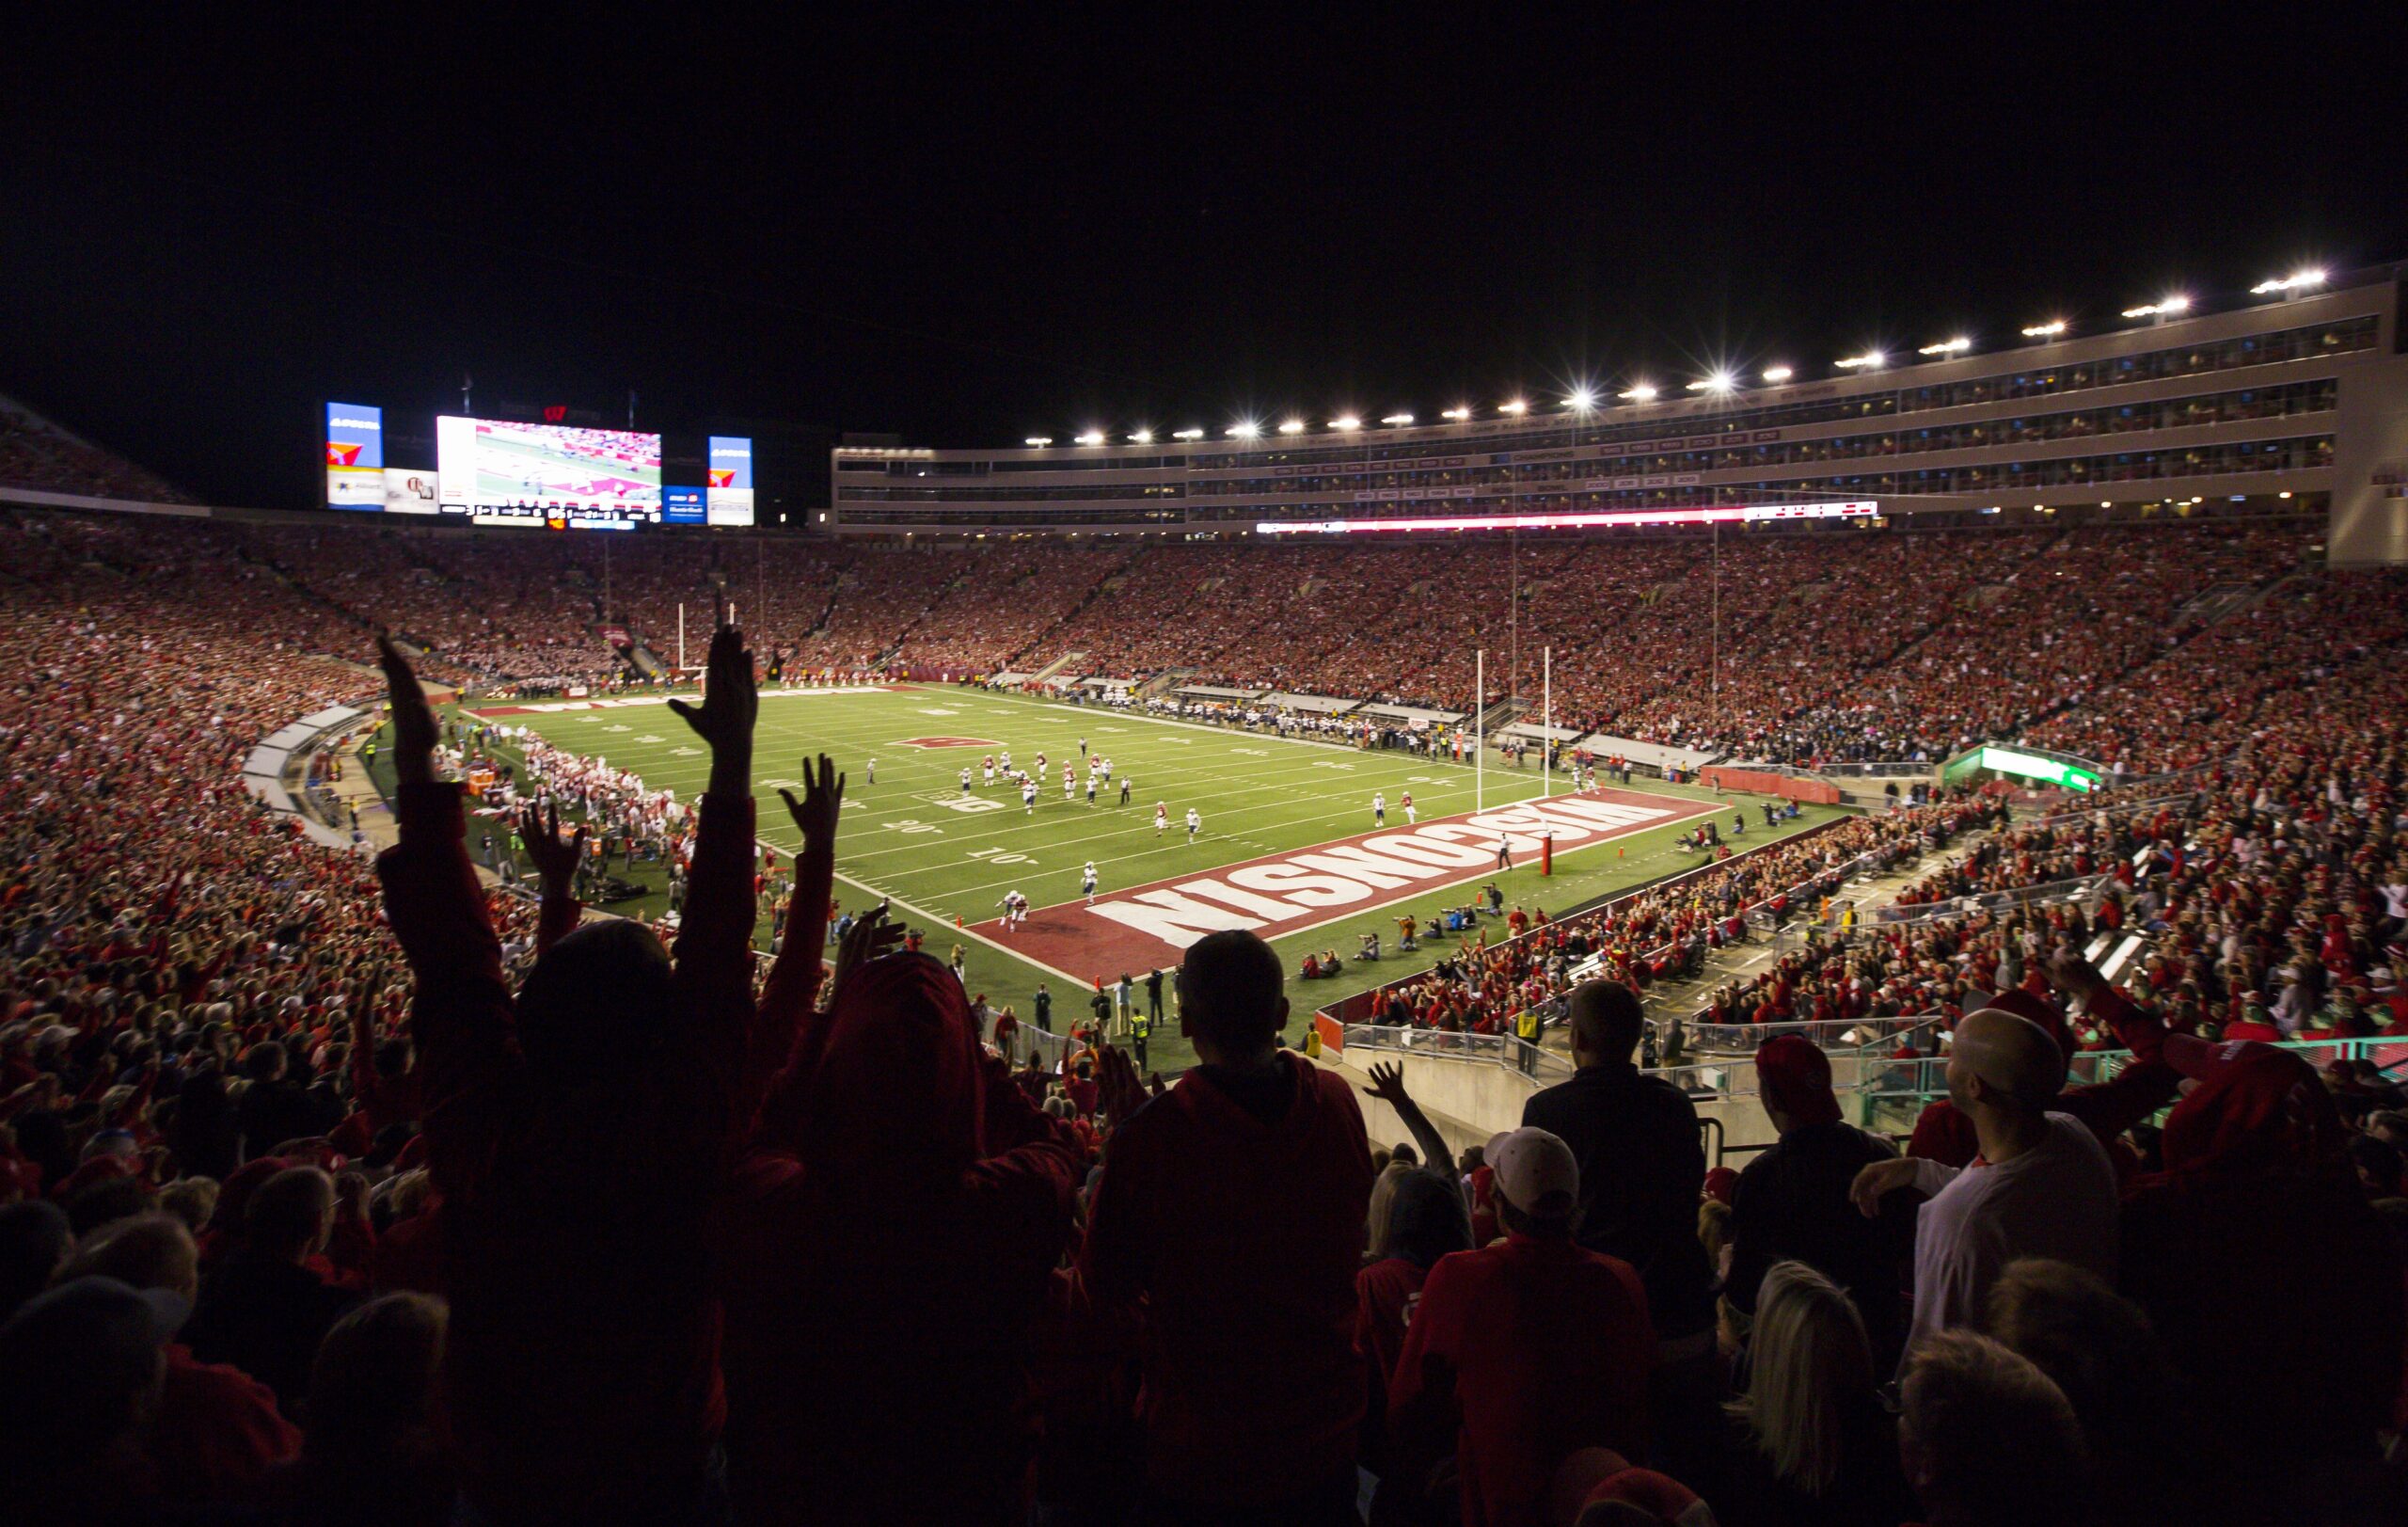 Wisconsin fans celebrate during night game at Camp Randall Stadium